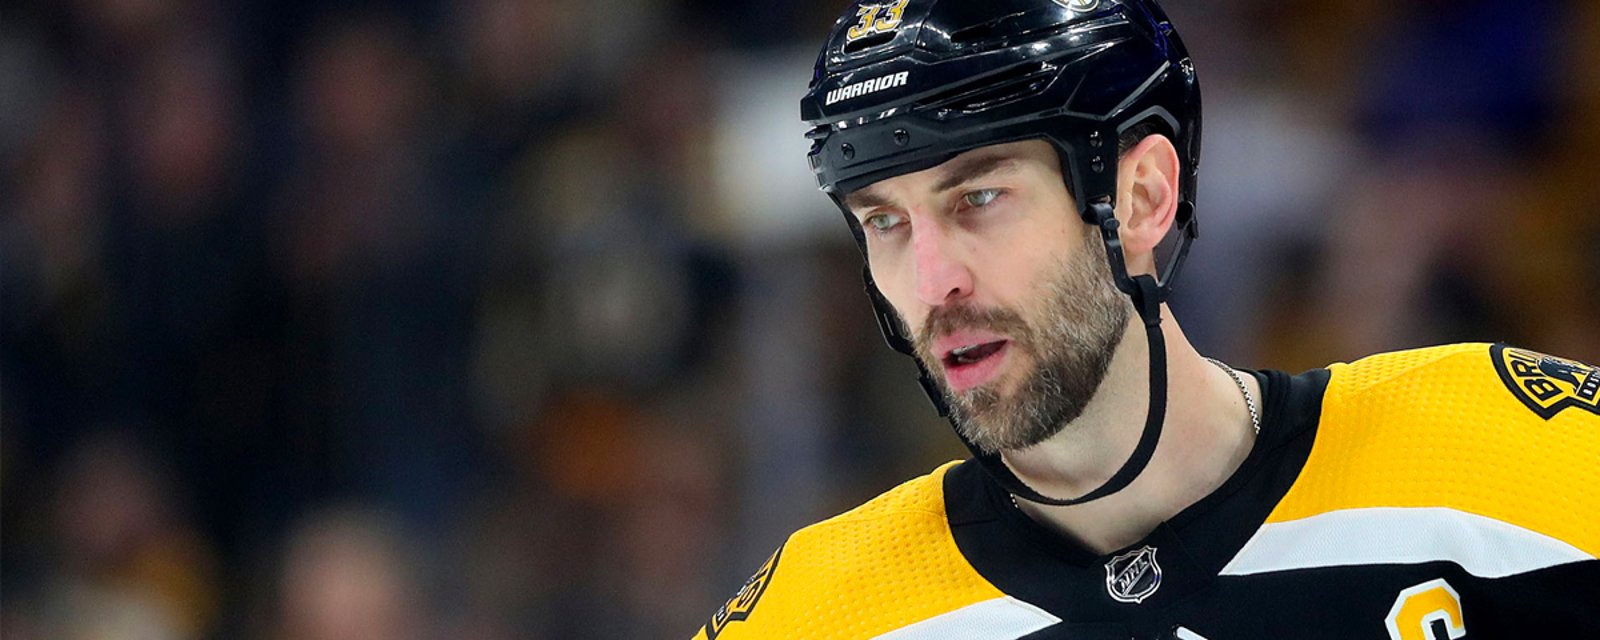 Breaking: Bruins pull Chara out of the lineup just minutes before puck drop